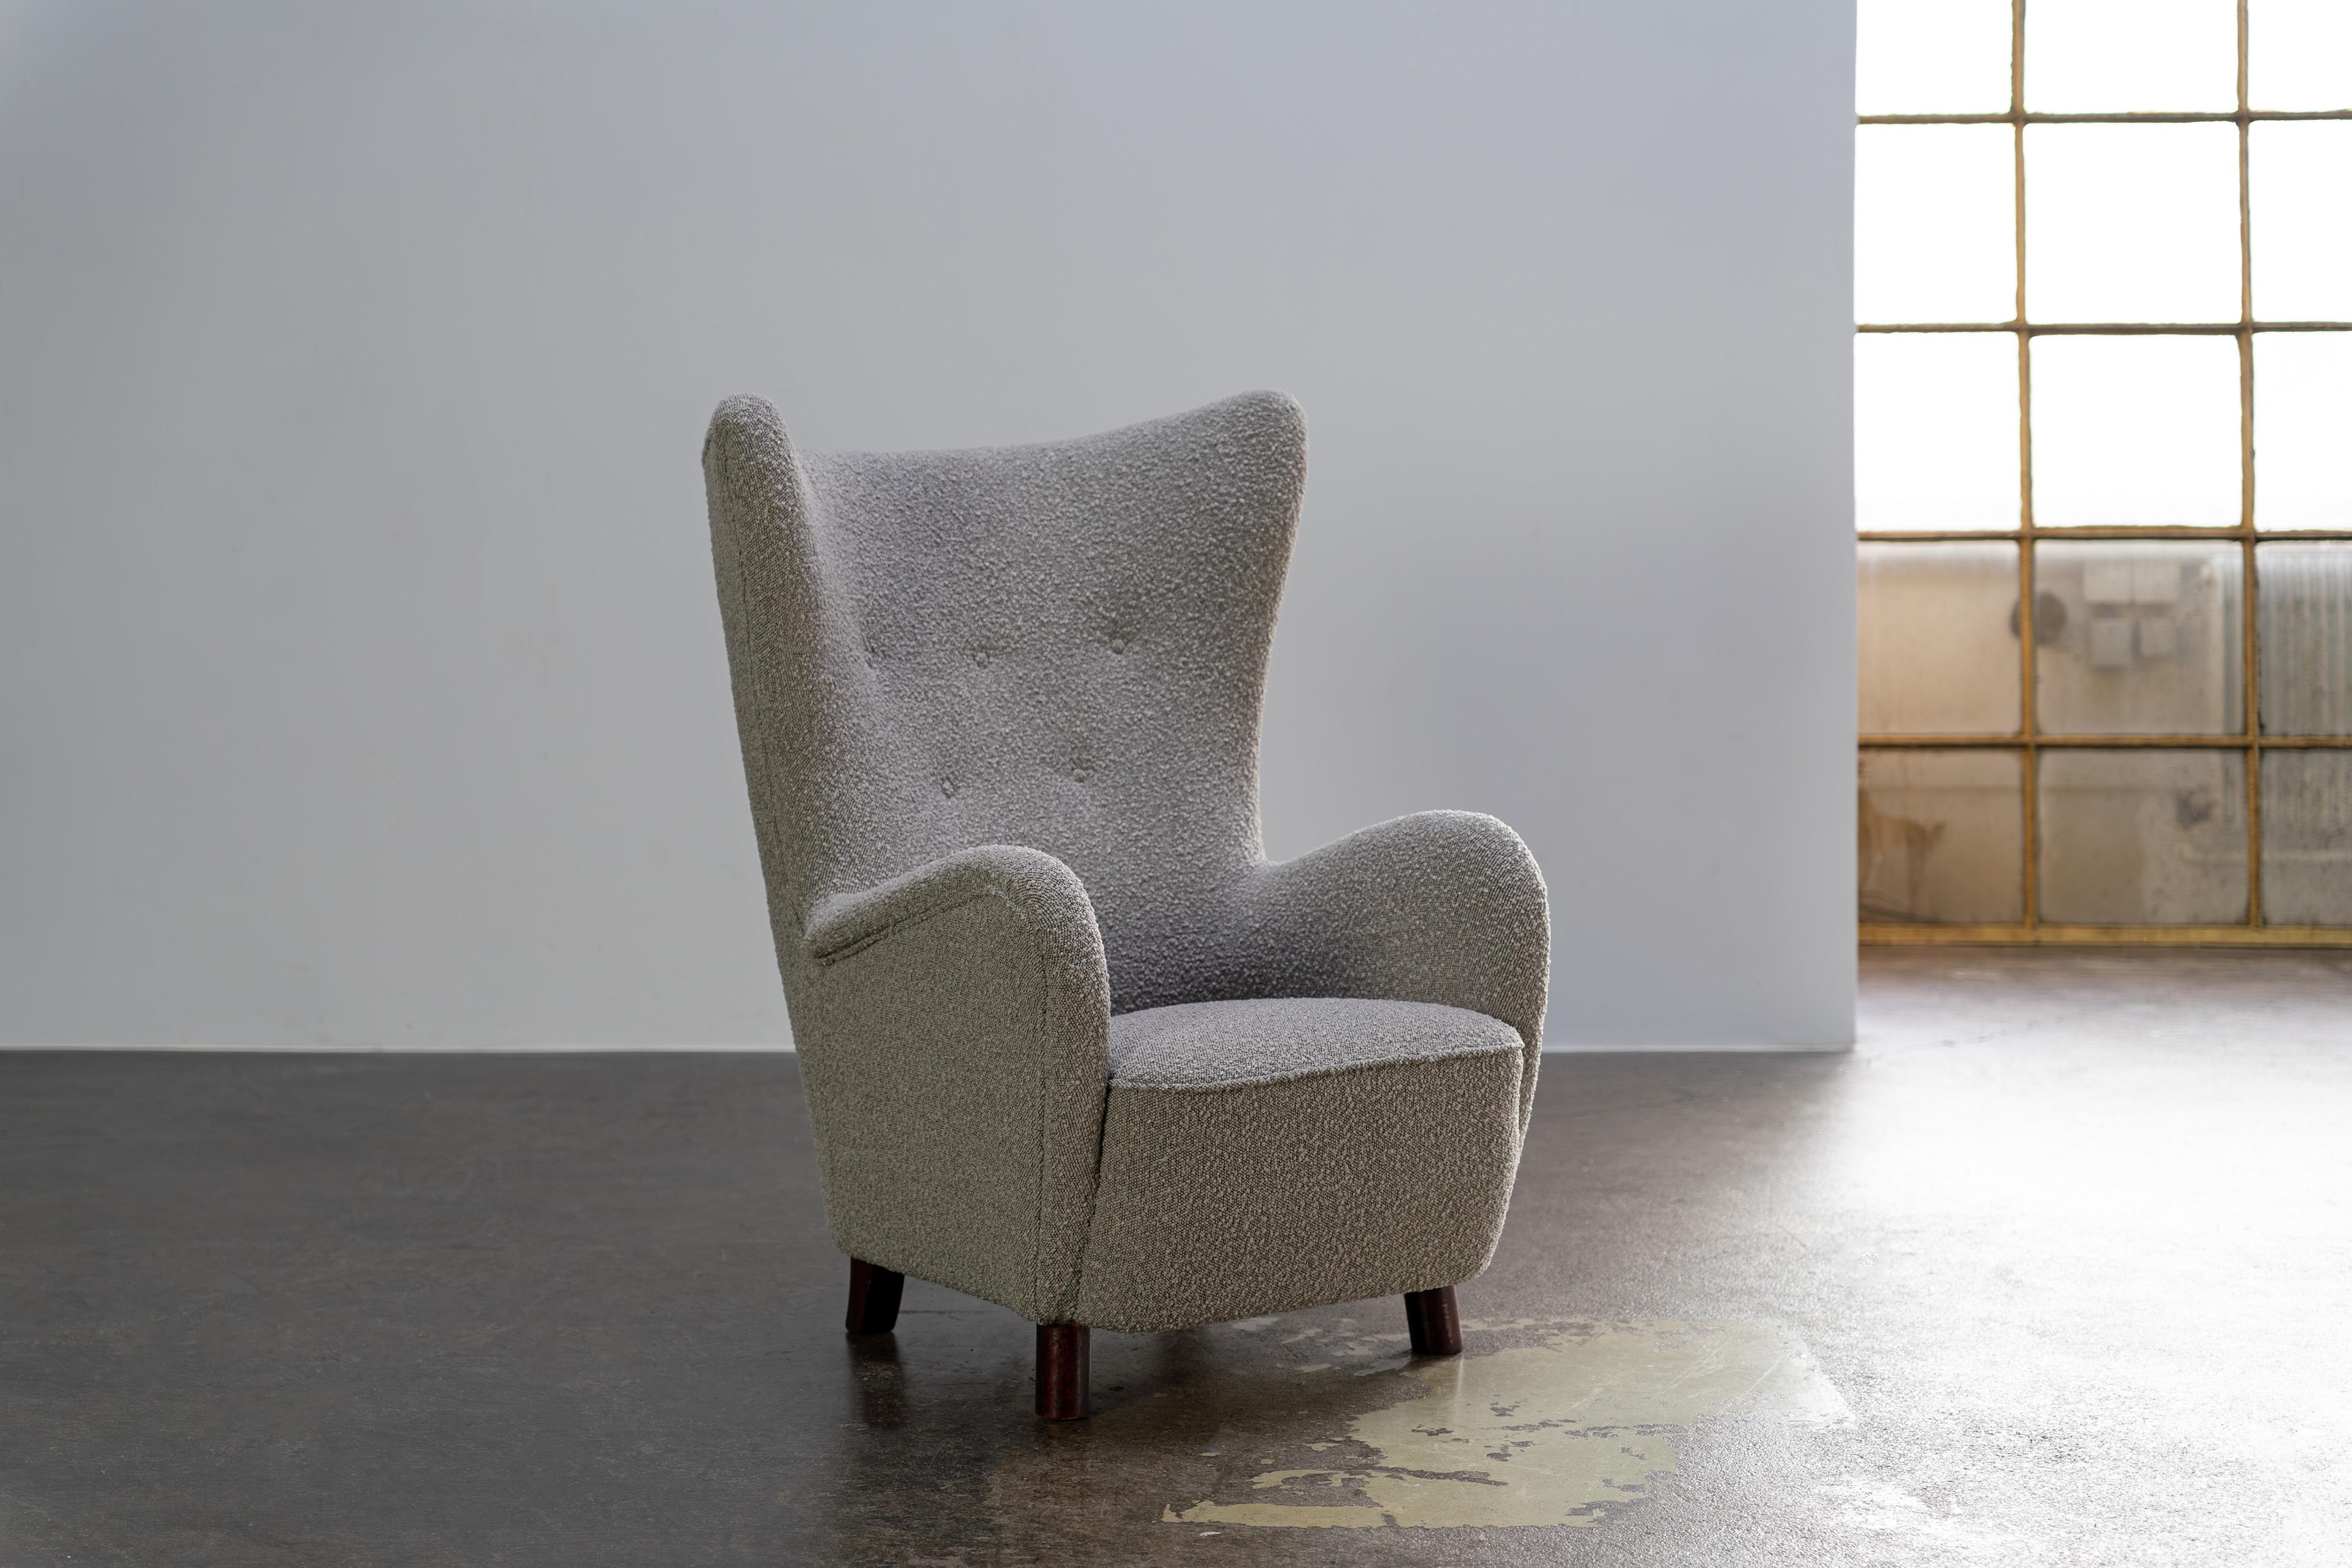 Vintage Mogens Lassen Wingback Chairs From Denmark, Boucle Fabric, 1950s For Sale 2